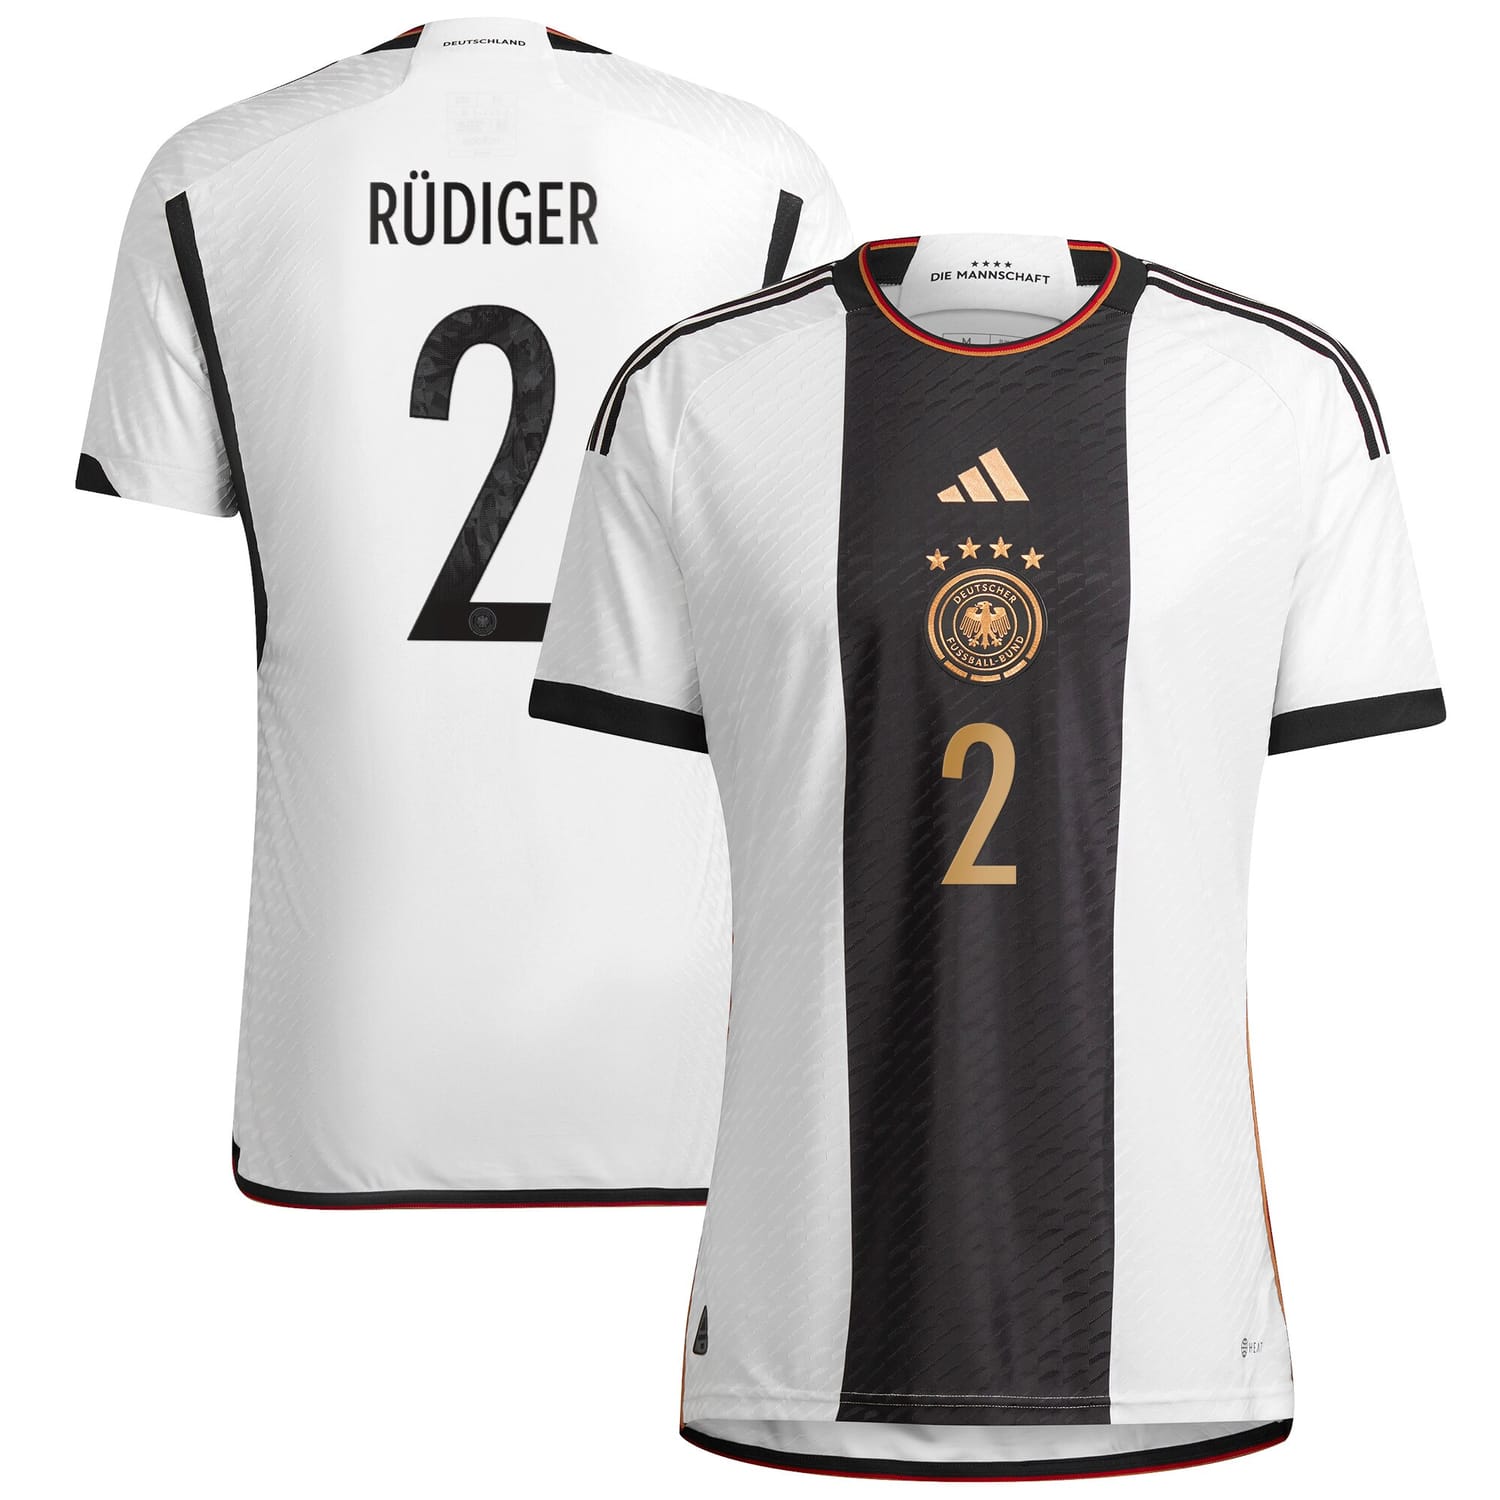 Germany National Team Home Authentic Jersey Shirt player Antonio Rüdiger 2 printing for Men